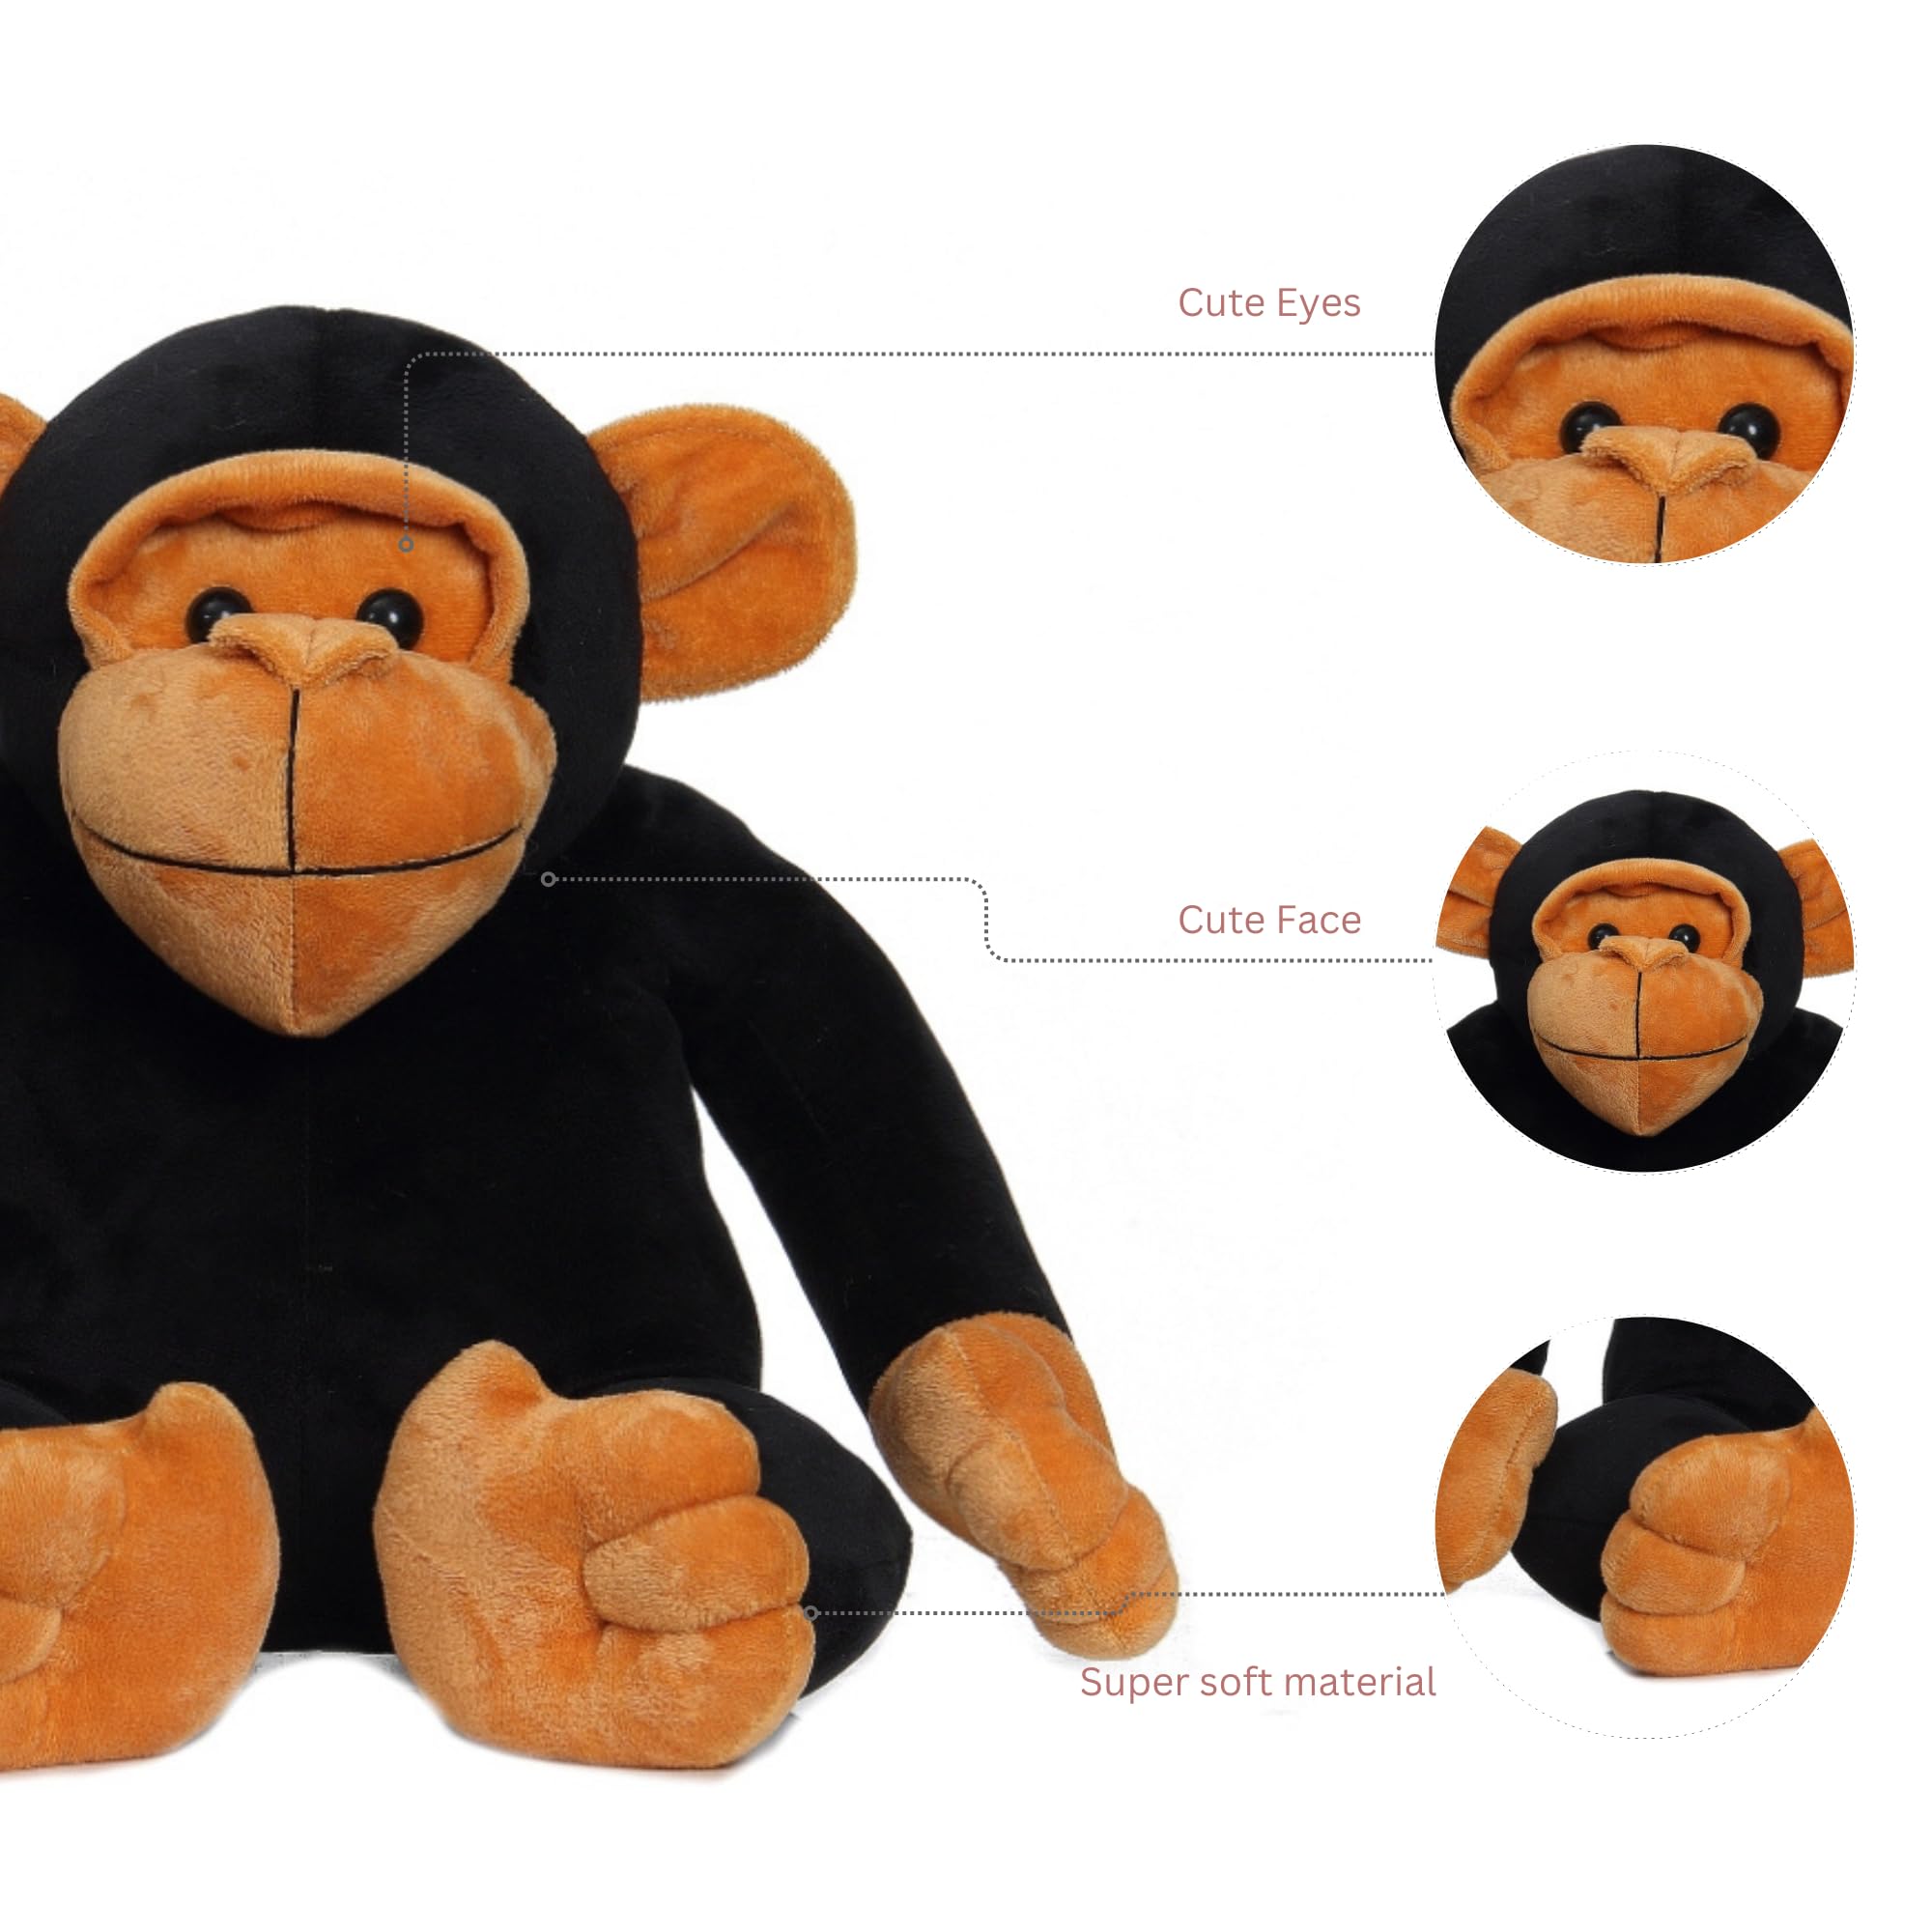 Kong Monkey Plush Toy, Cute and Huggable Animal Stuffed Toy, Soft and Cuddly for Kids, Boys, and Girls - Best Birthday Gift Idea - 30 cm